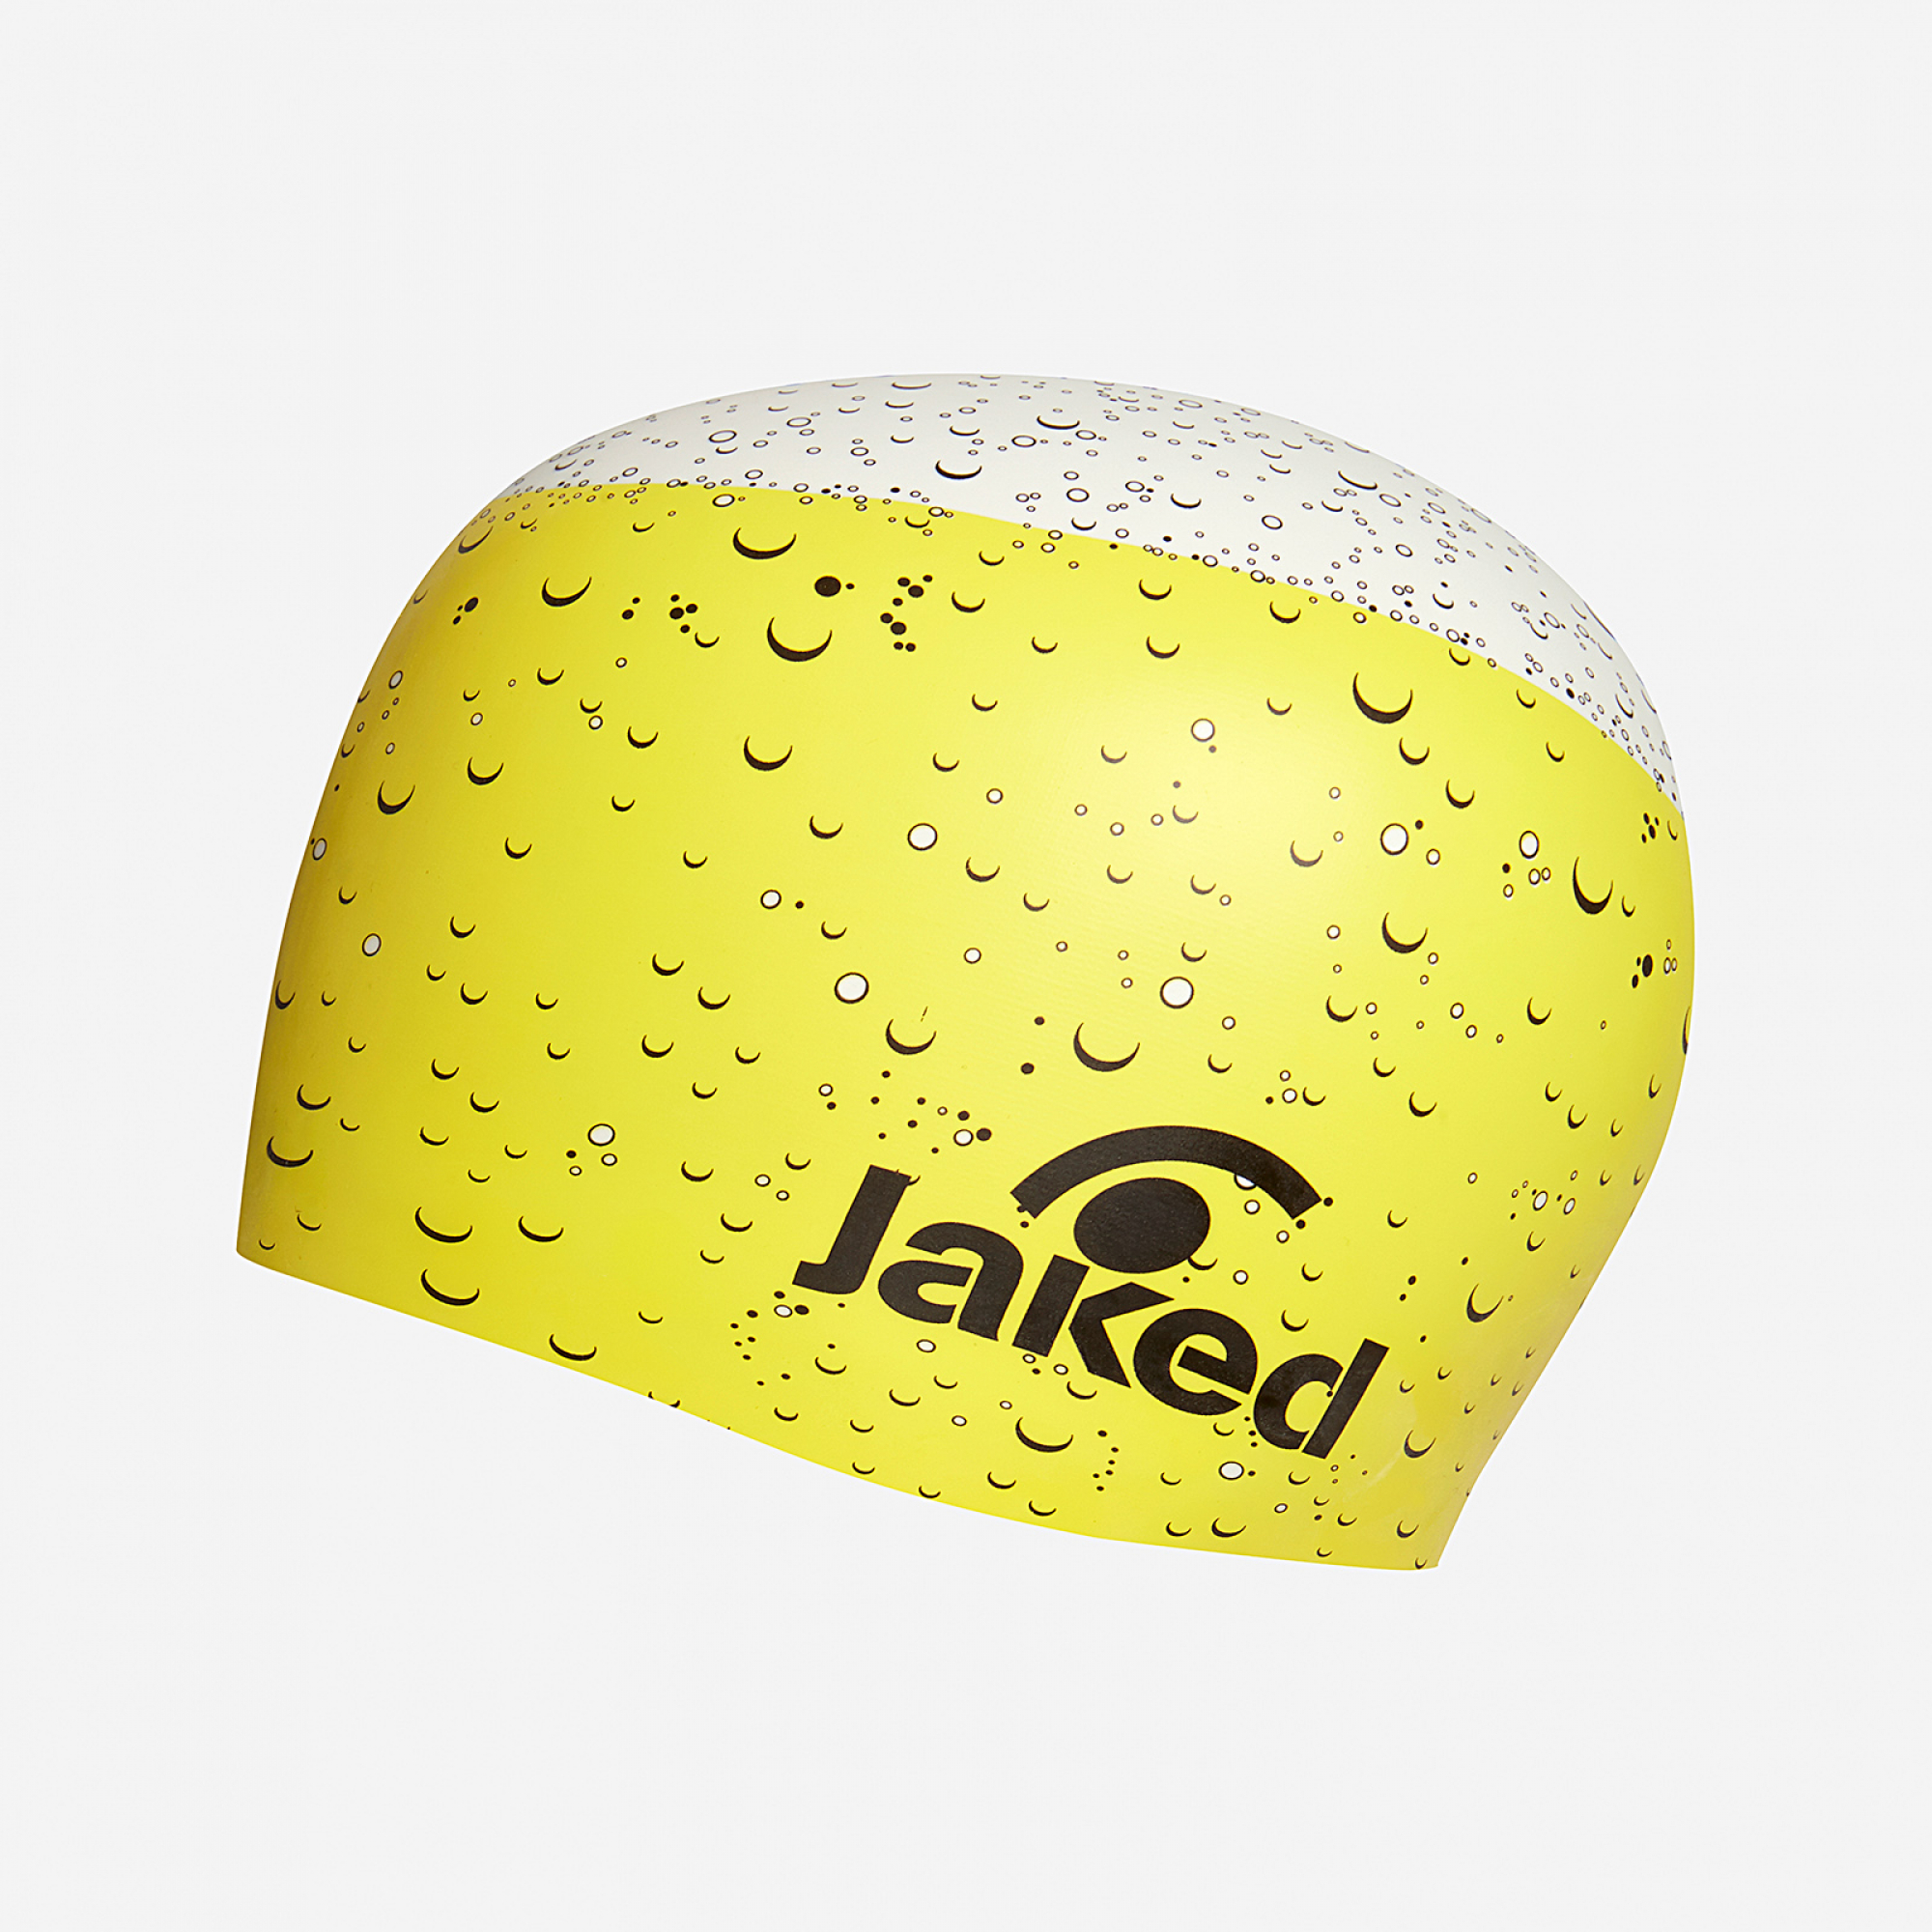 Cuffia piscina con stampa BEER |Jaked | Jaked